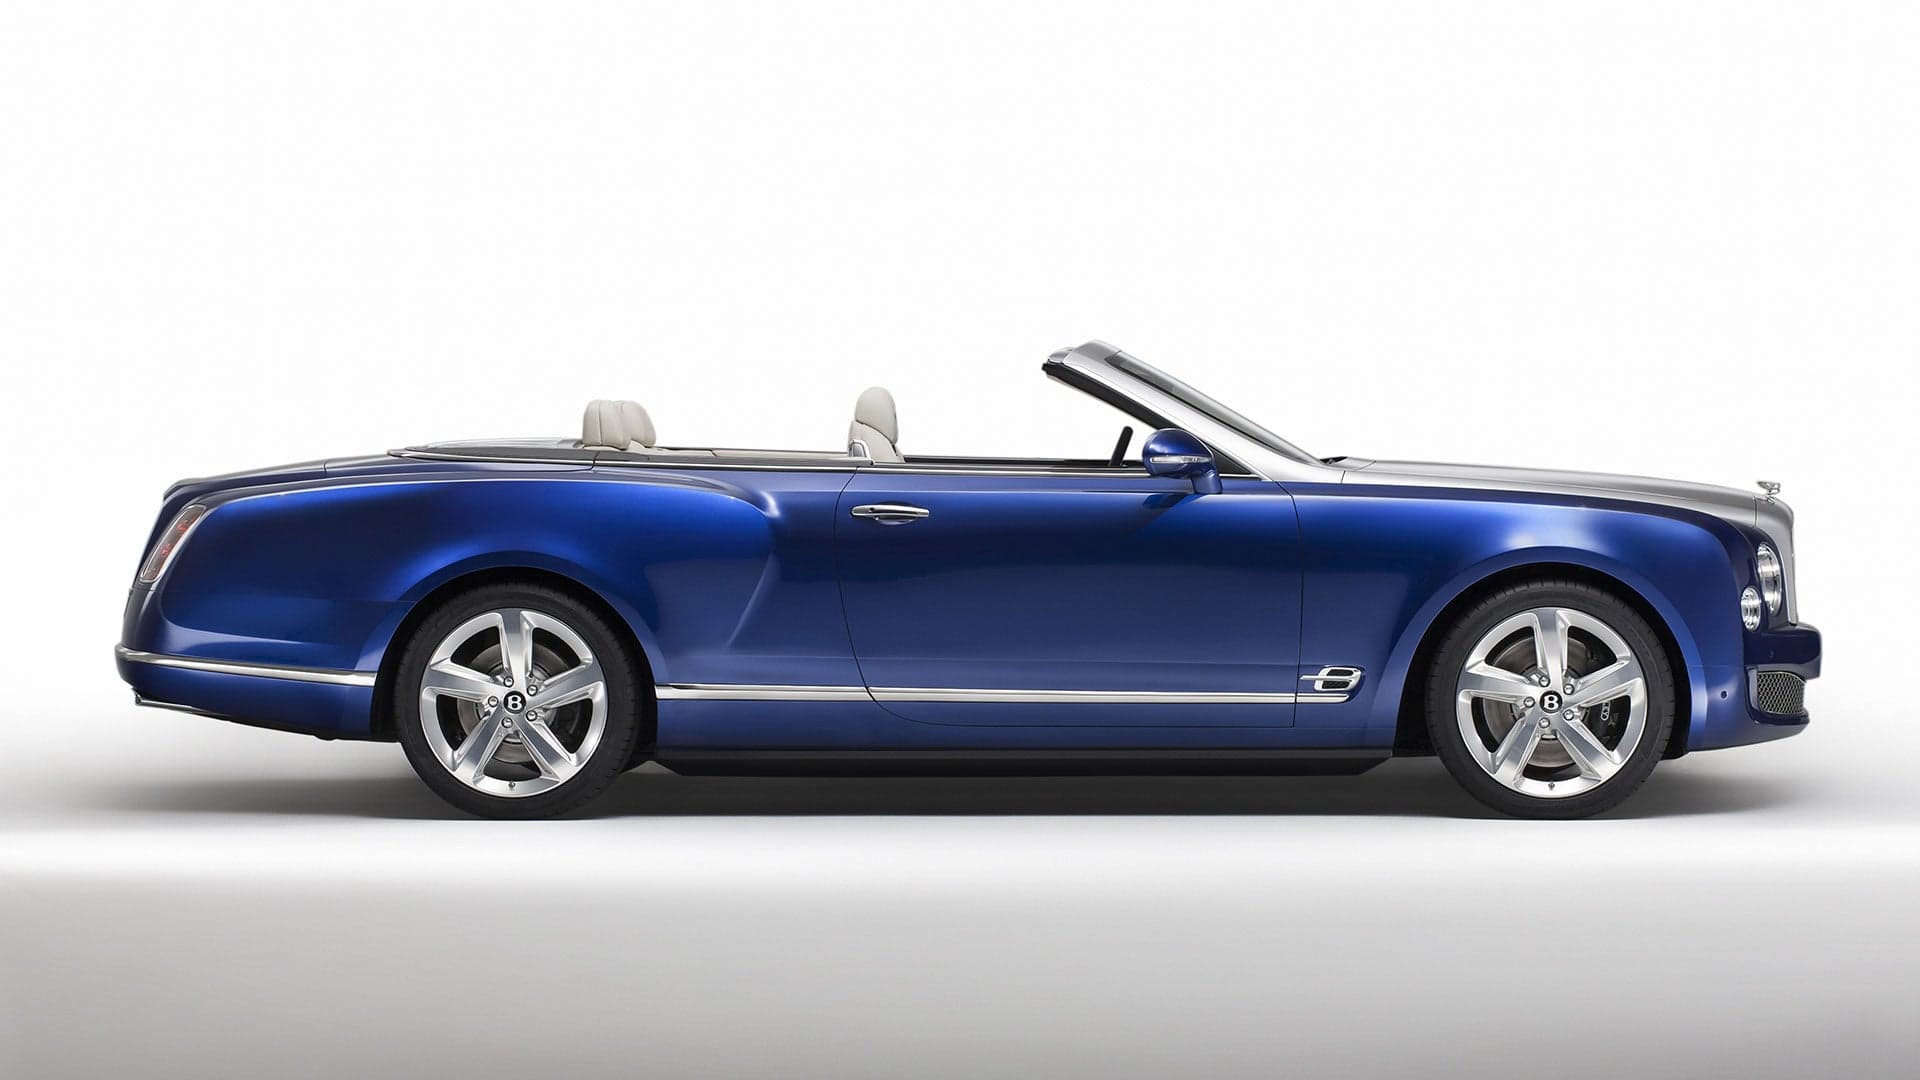 Bentley Could Bring Back an Ultra-Luxury Convertible to Crush the Rolls-Royce Dawn